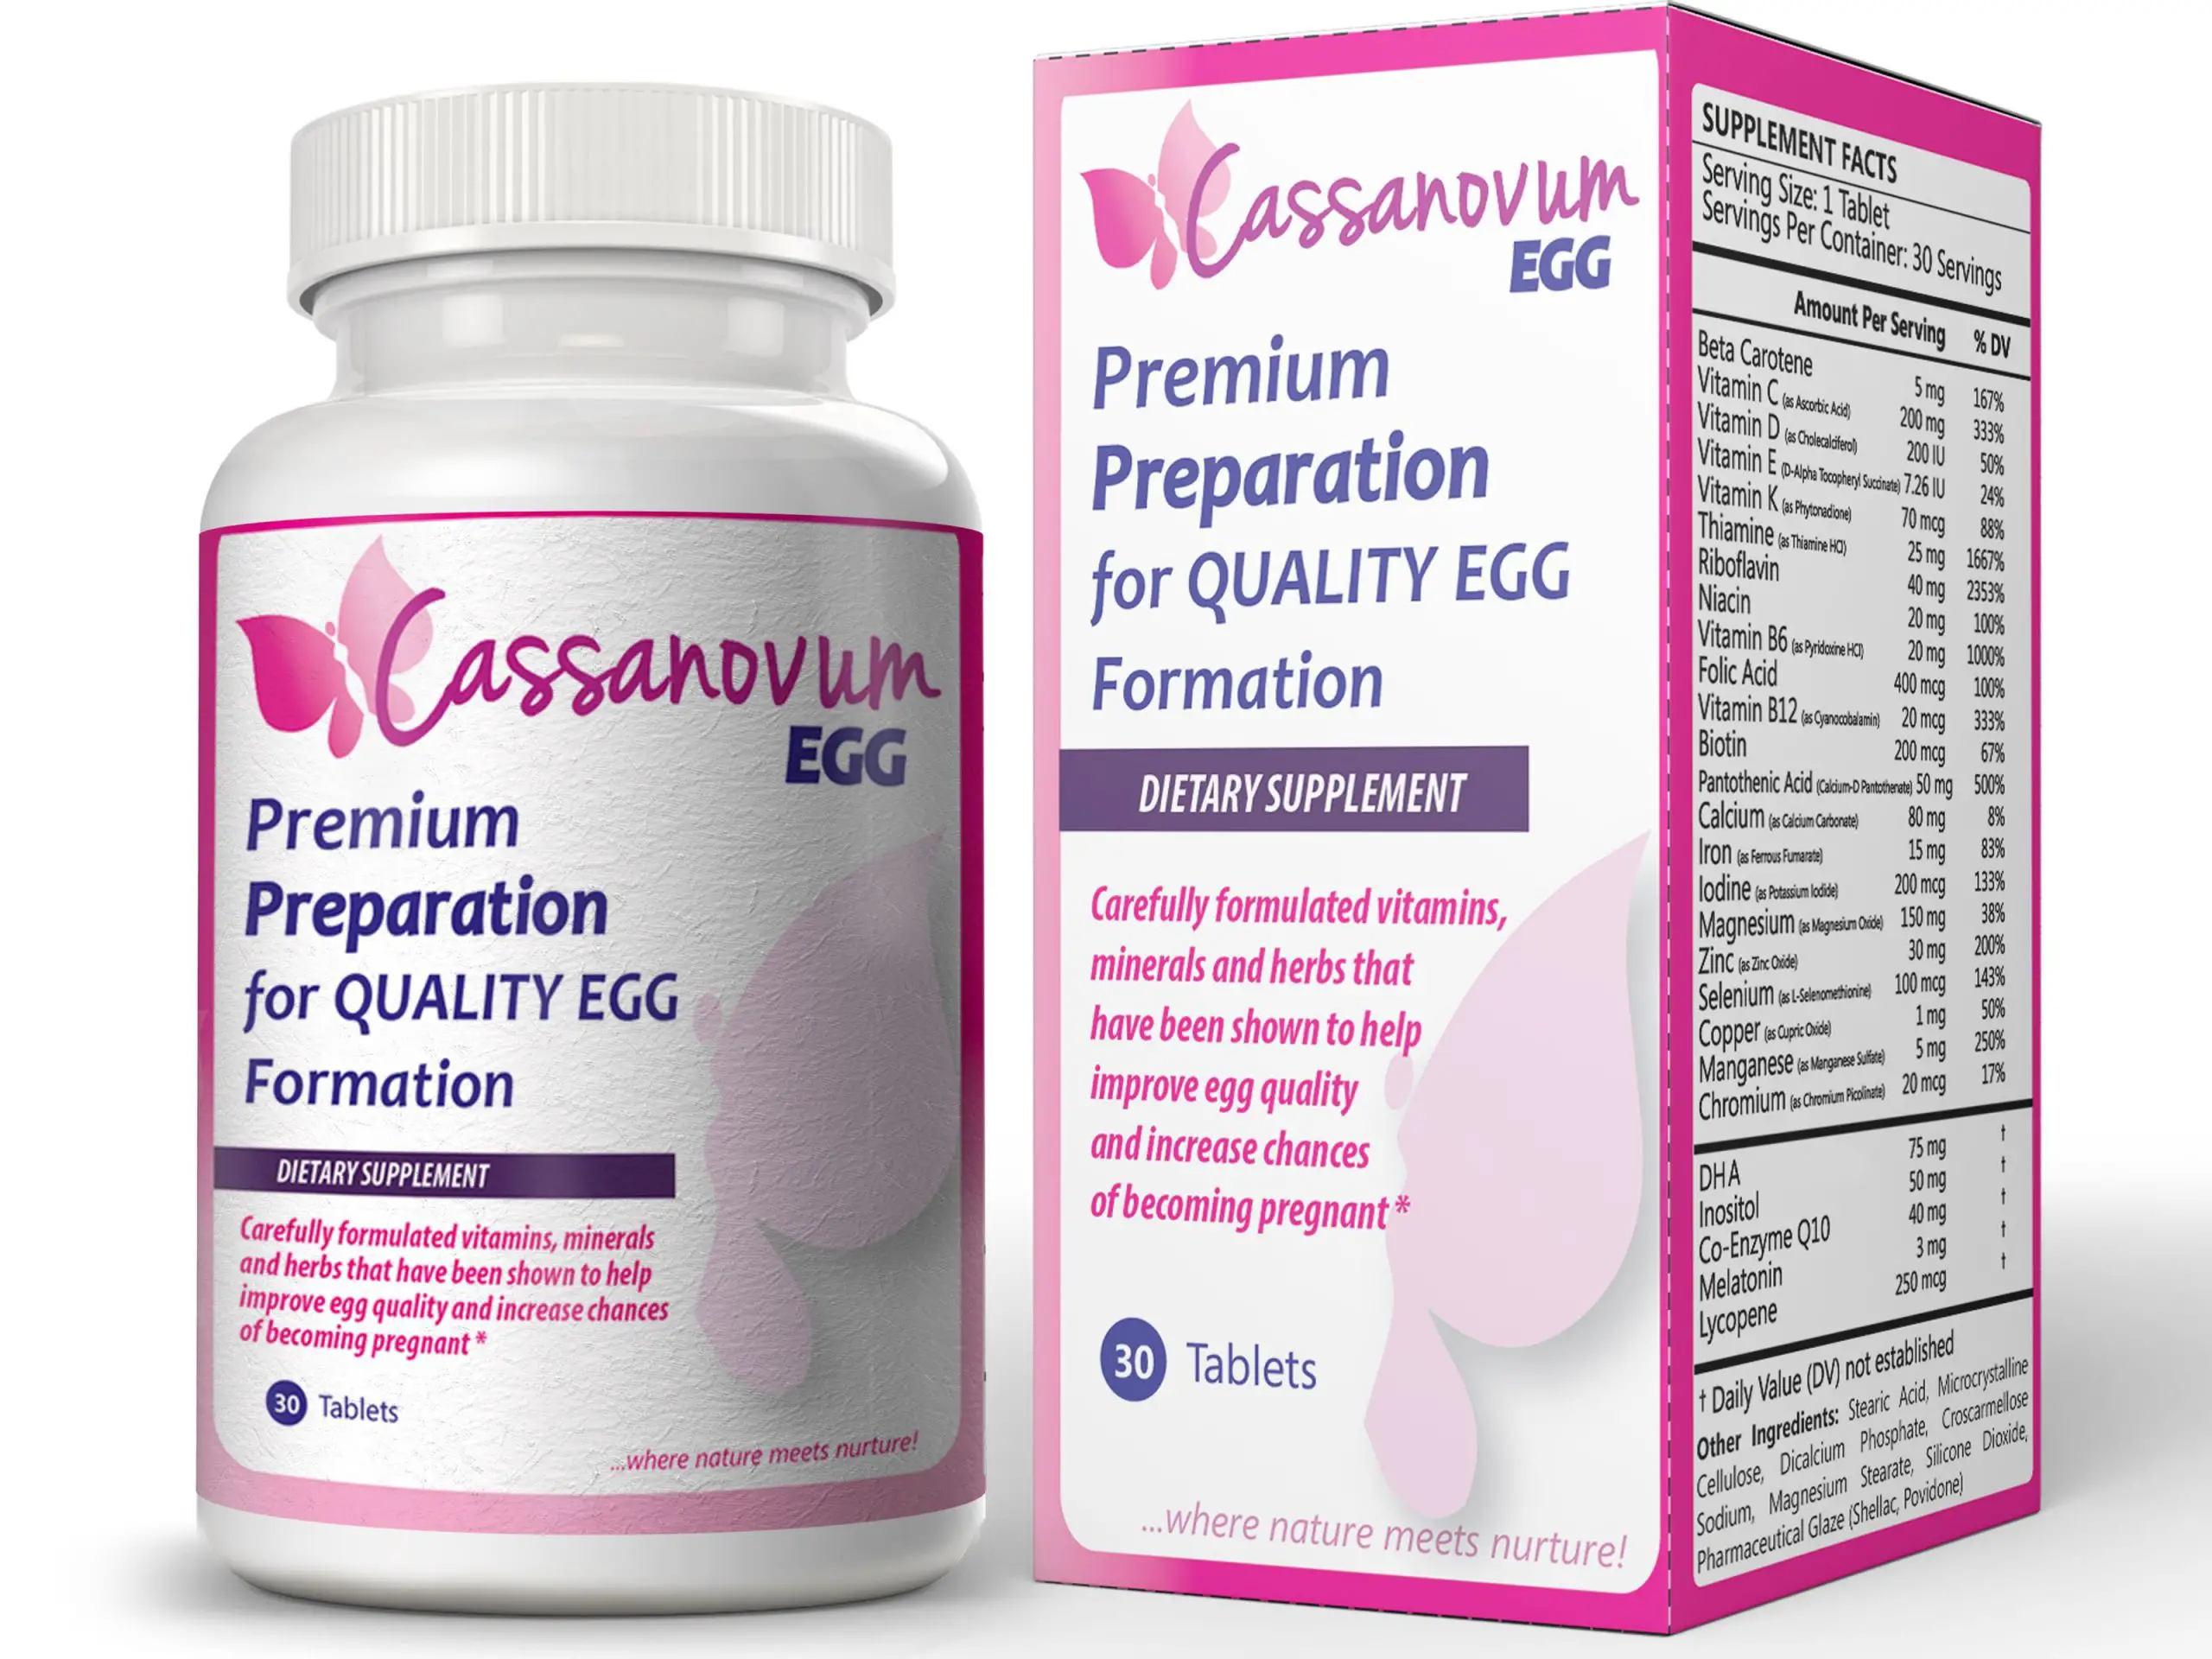 Premium Preparation for Quality Egg Formation (With images ...